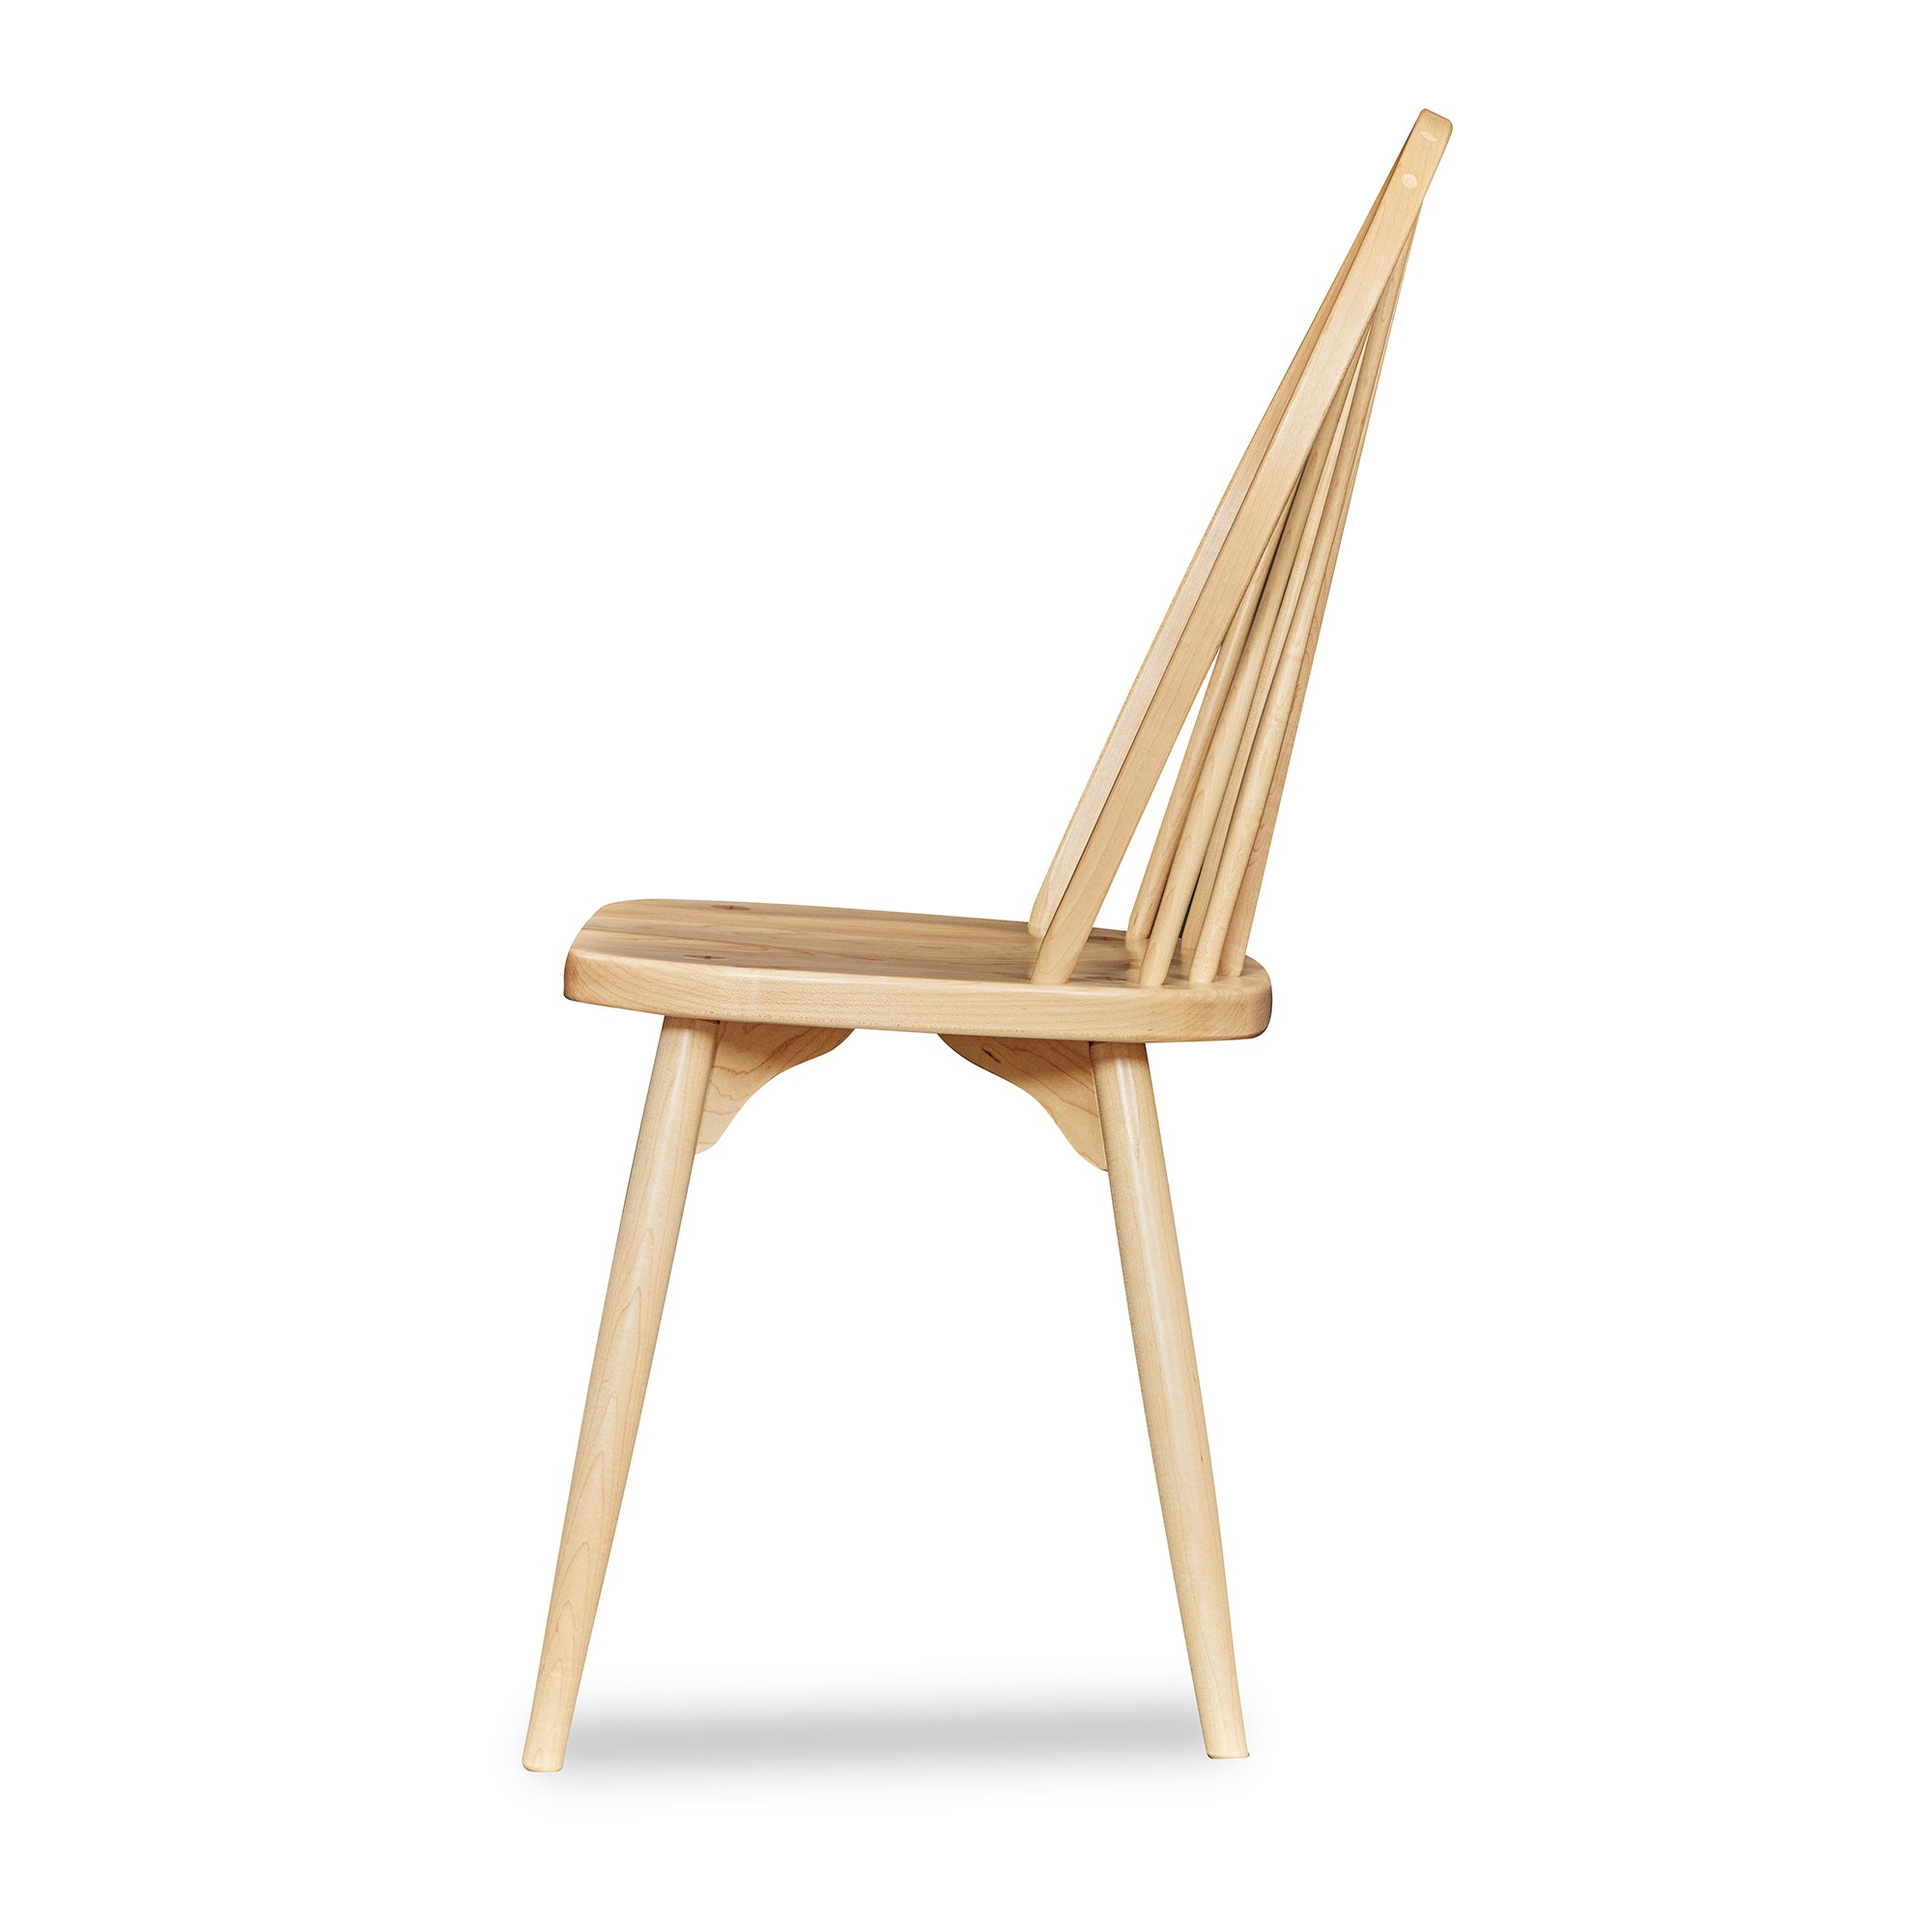 Farmington Windsor style spindle back side chair in maple, view from side